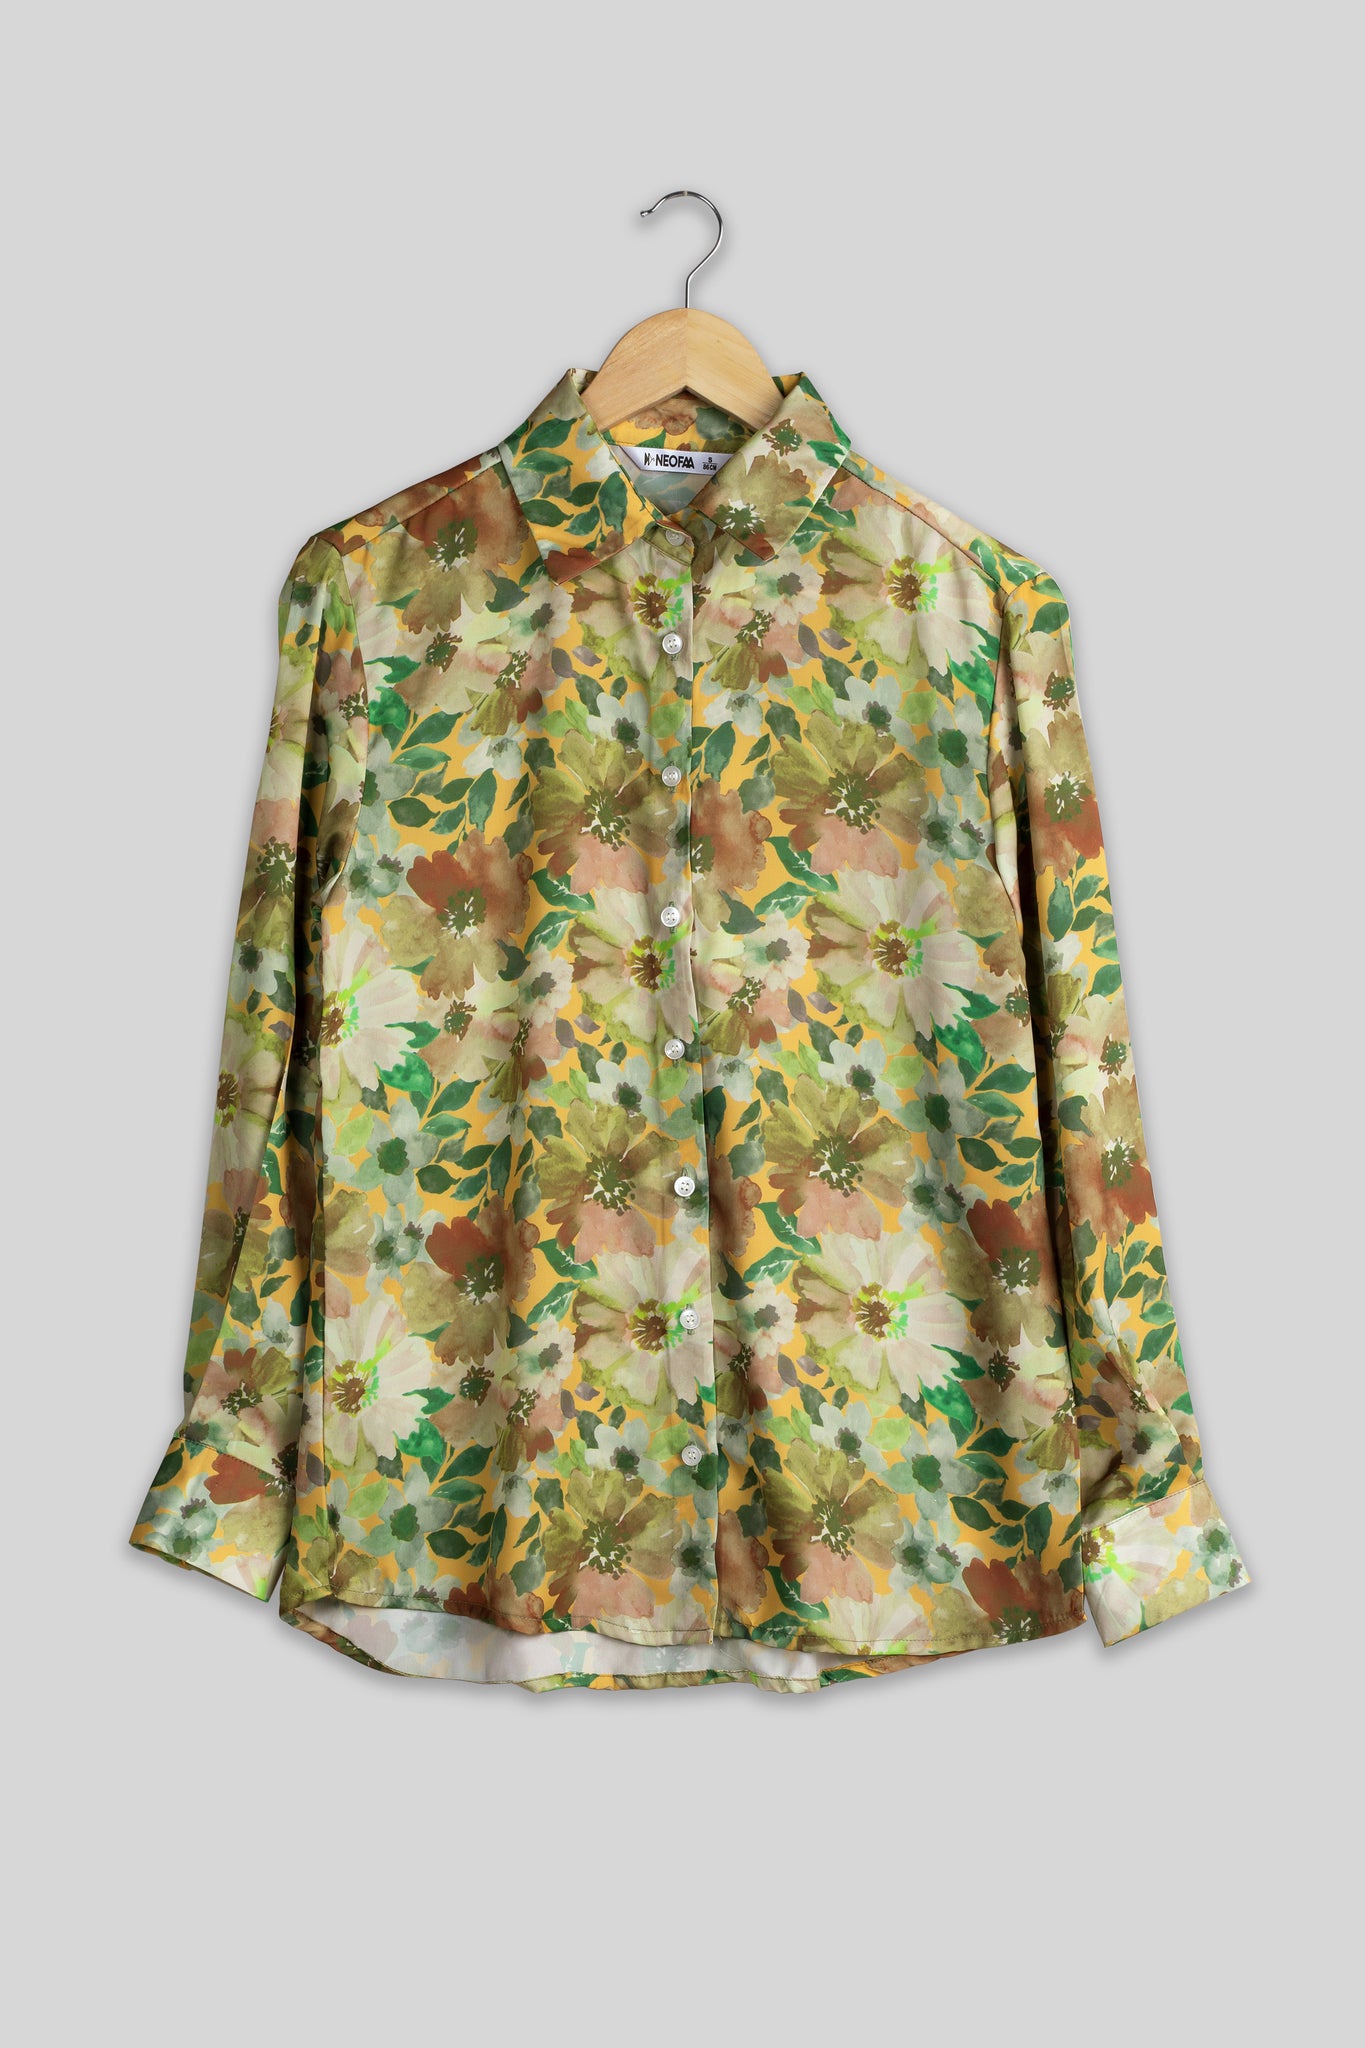 Top Selling Floral Shirt For Women